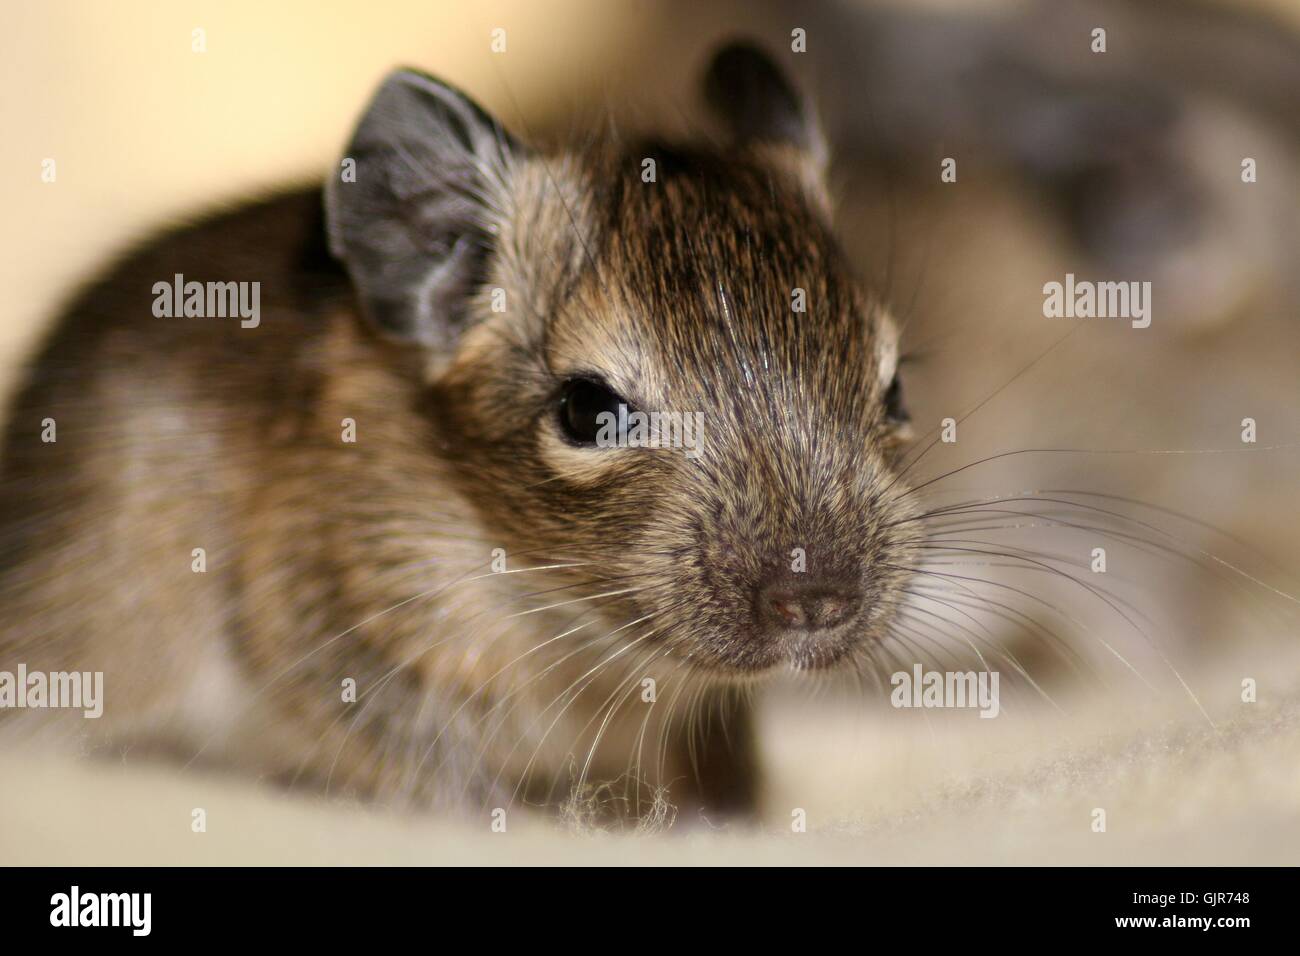 animal portrait rodent offspring Stock Photo